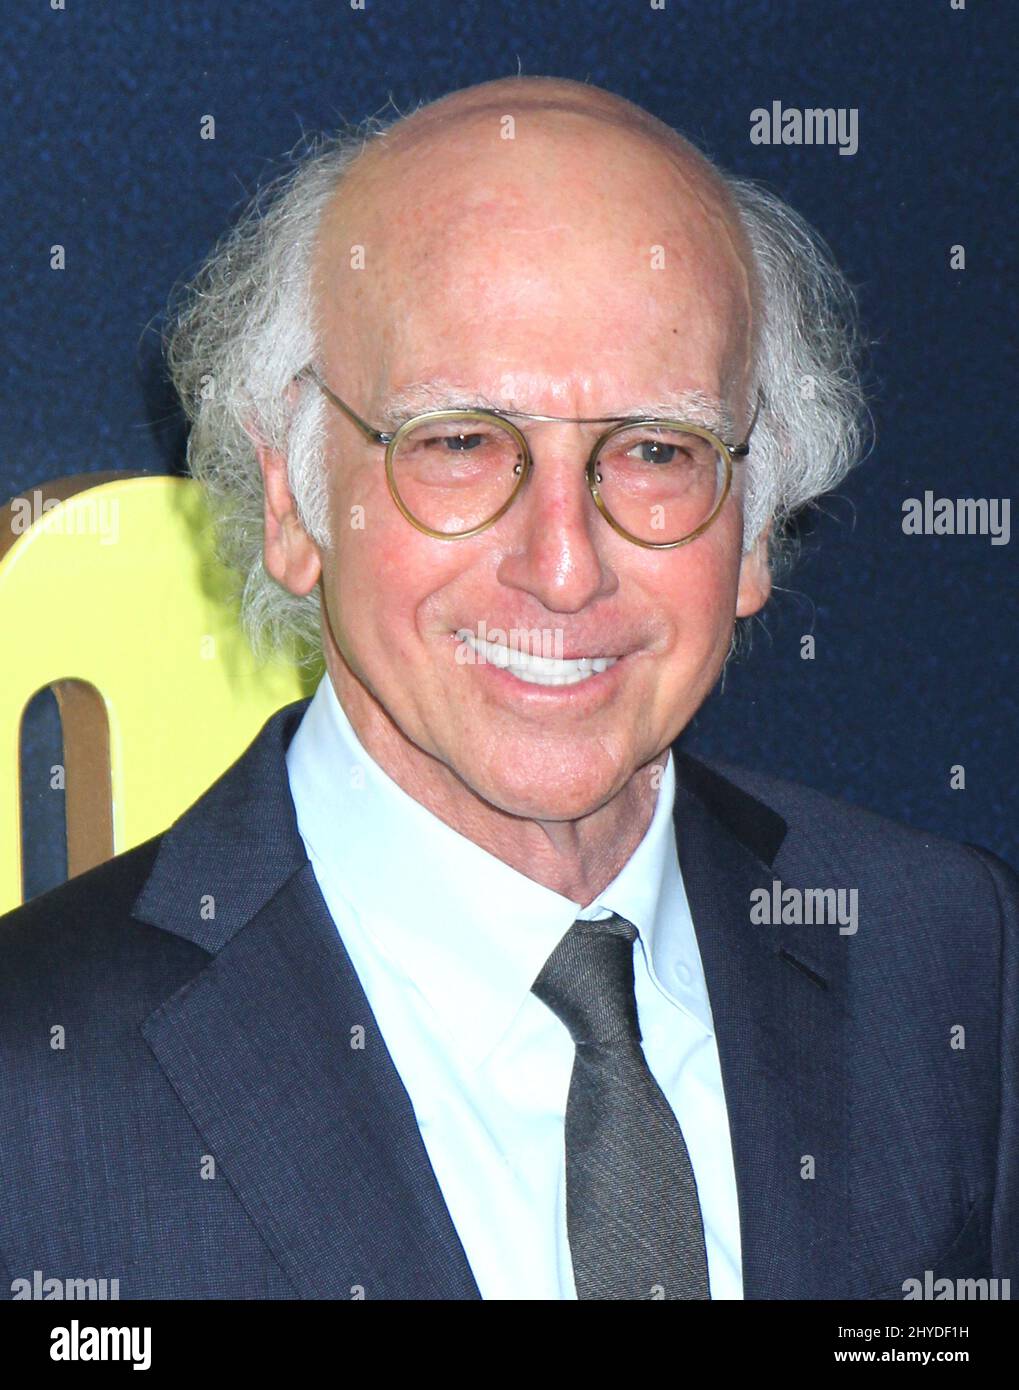 Larry David attending 'Curb Your Enthusiasm' Season 9 Premiere Held at the SVA Theater on September 27, 2017 Stock Photo